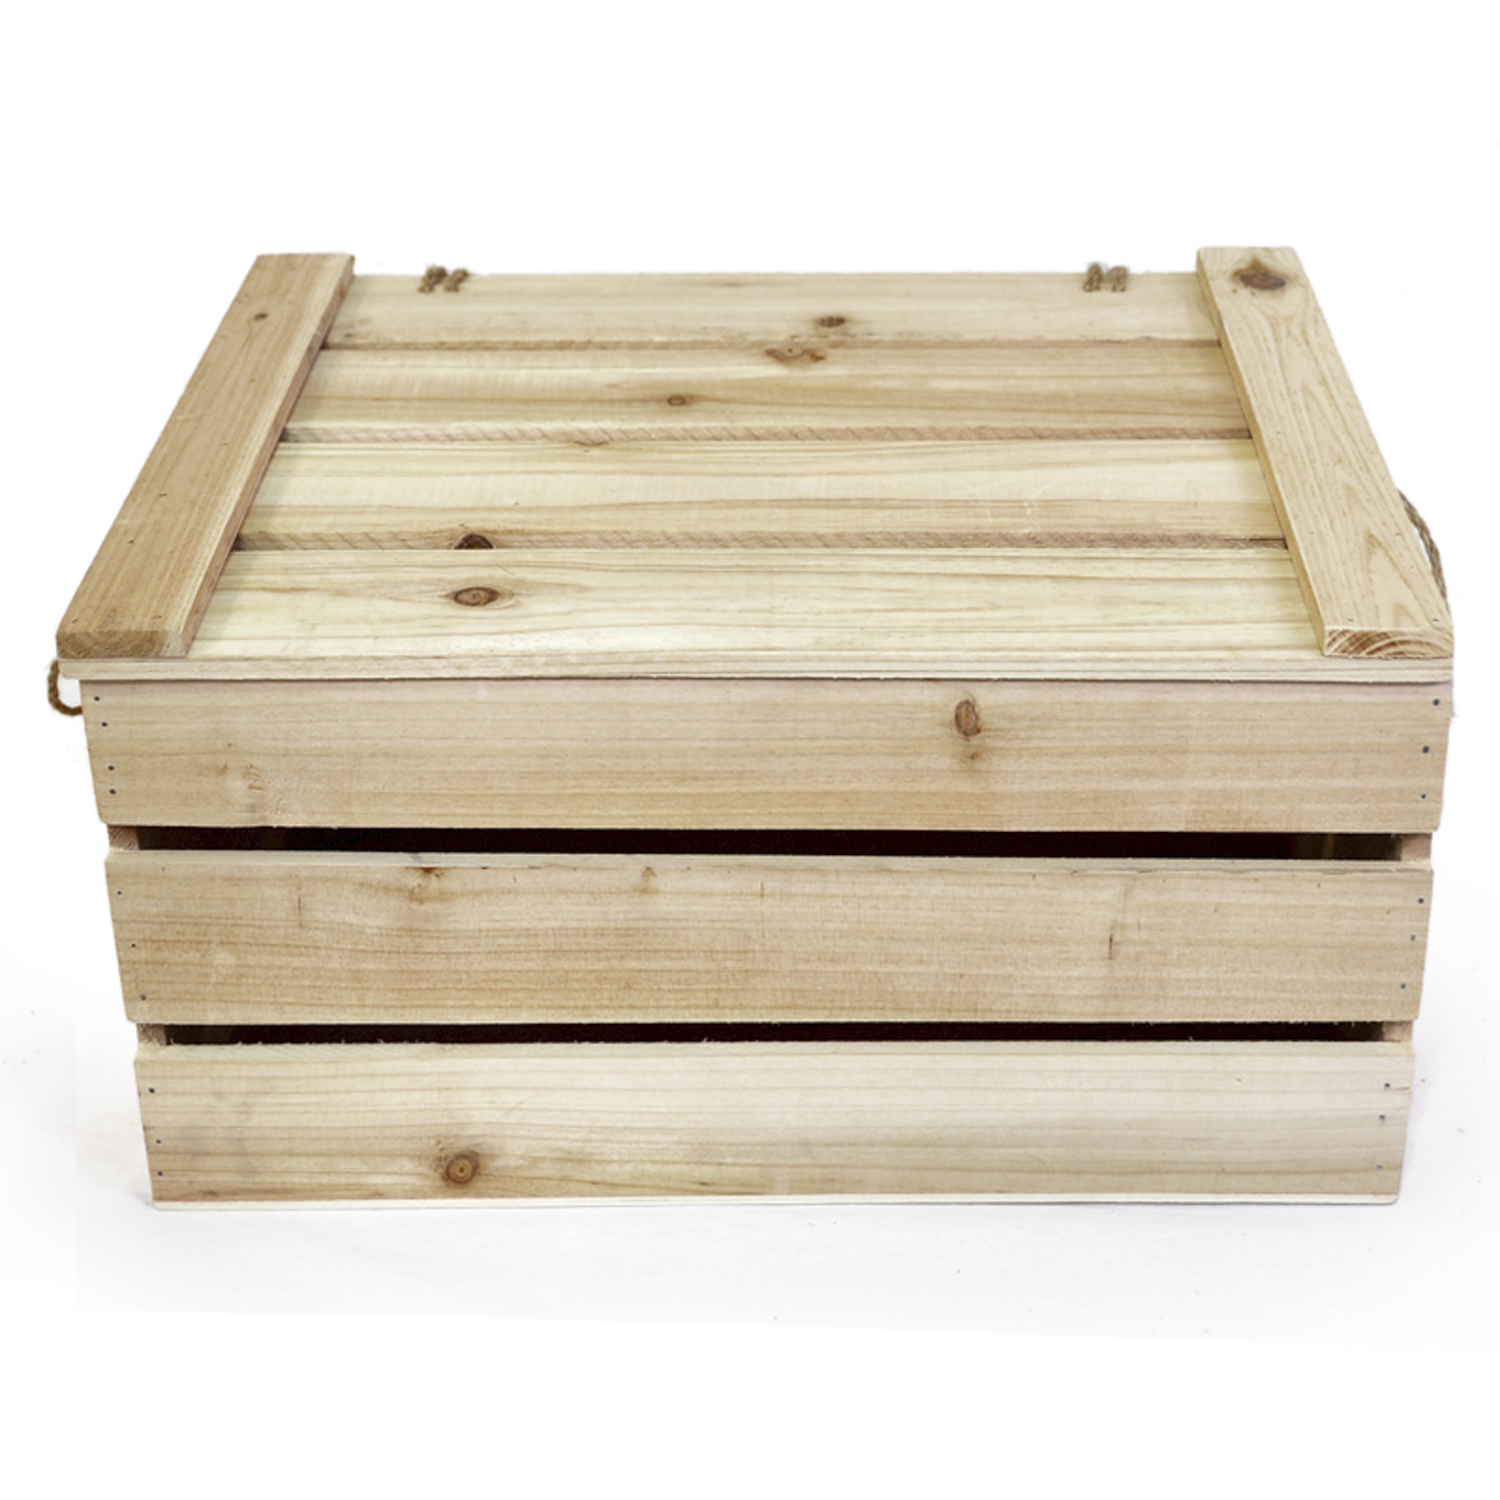 Natural Wooden Storage Box with Lid - Large The Lucky Clover Trading Co.